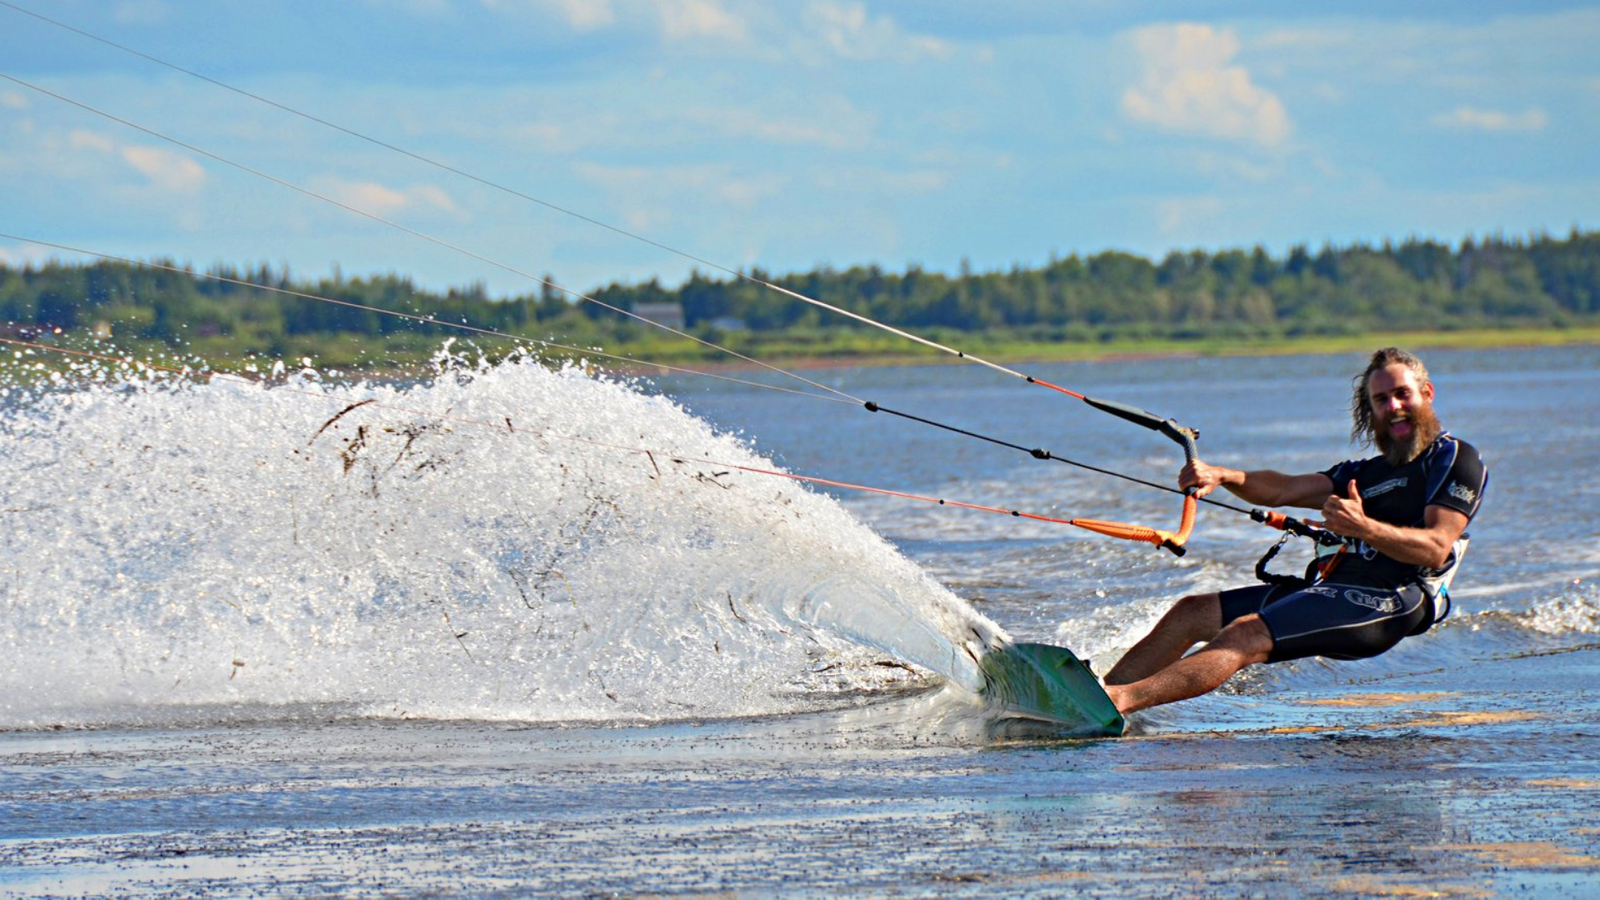 Kiteboarding Safety Tips: How to Stay Safe on the Water